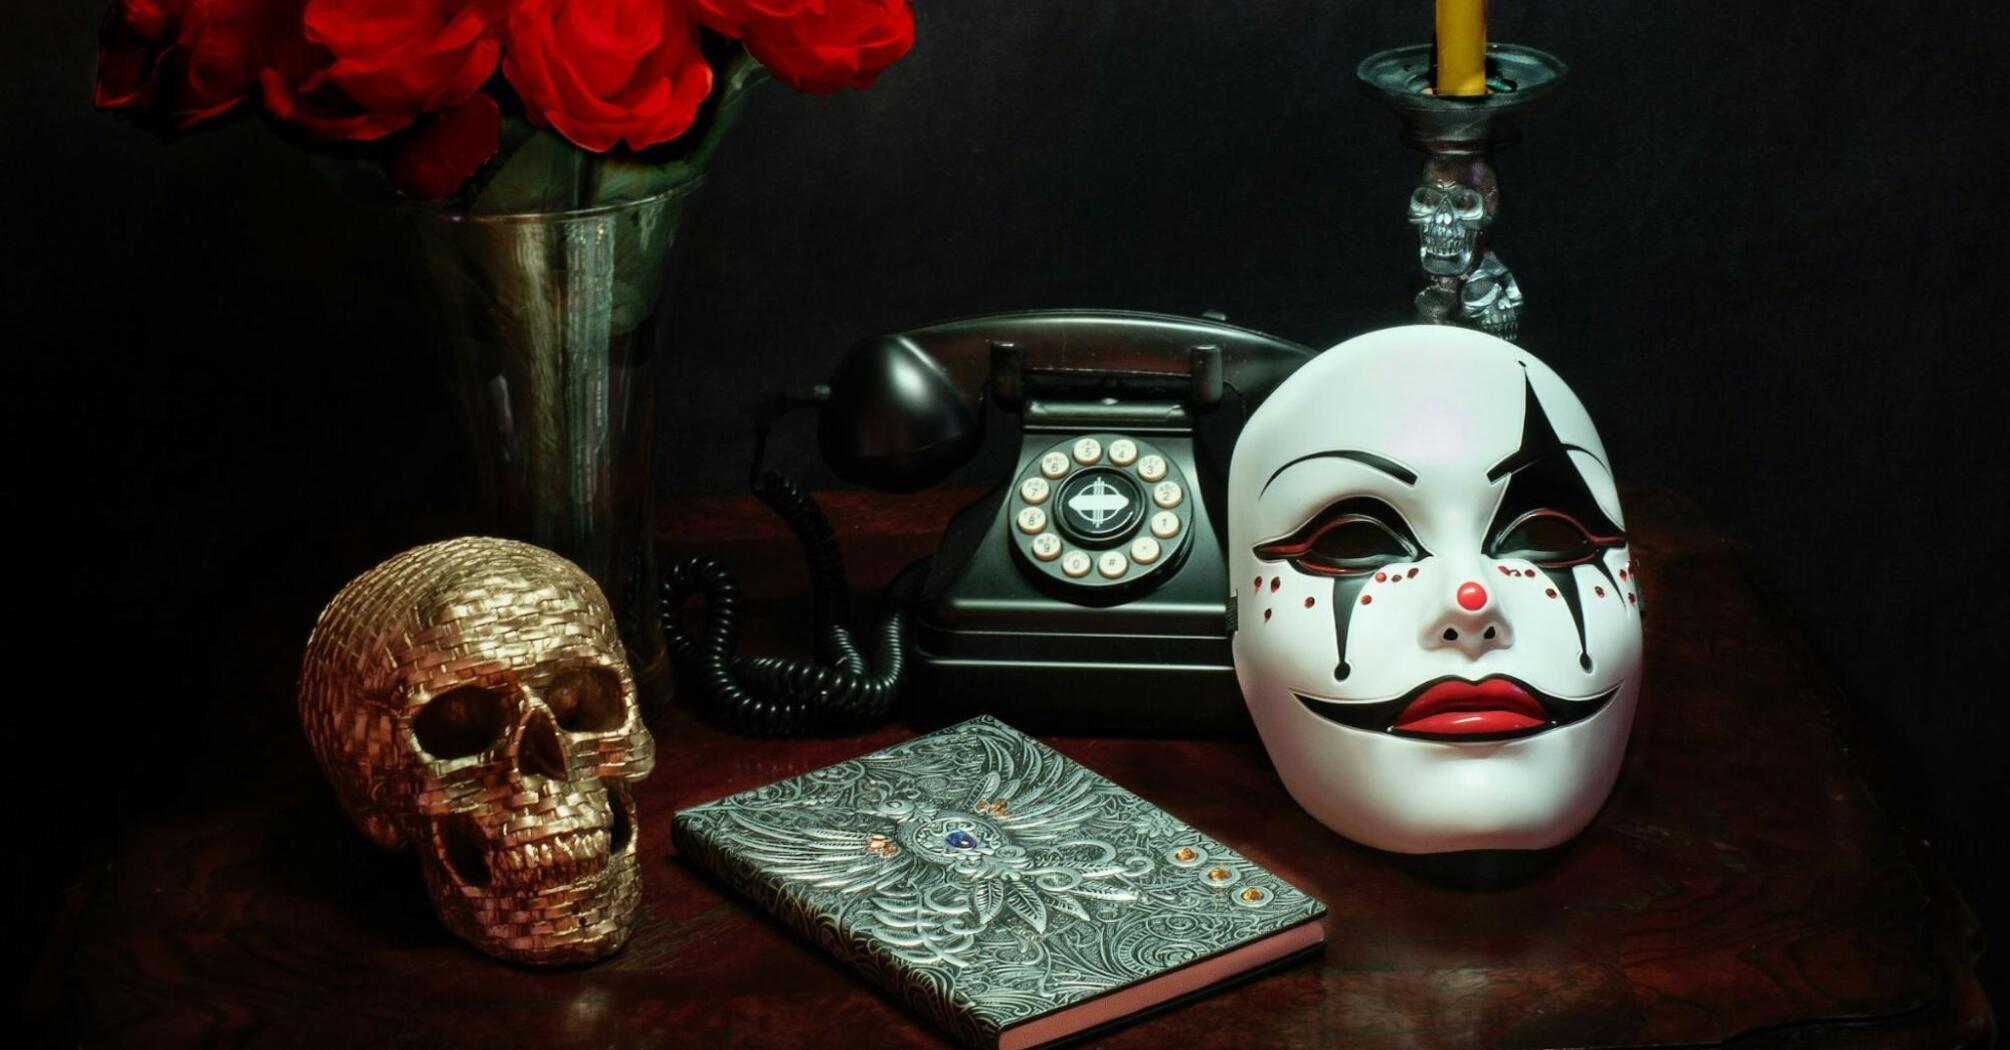 A vintage rotary phone, a theatrical mask, a golden skull, a bouquet of red roses, a candle, and an ornate journal arranged on a dark wooden table 